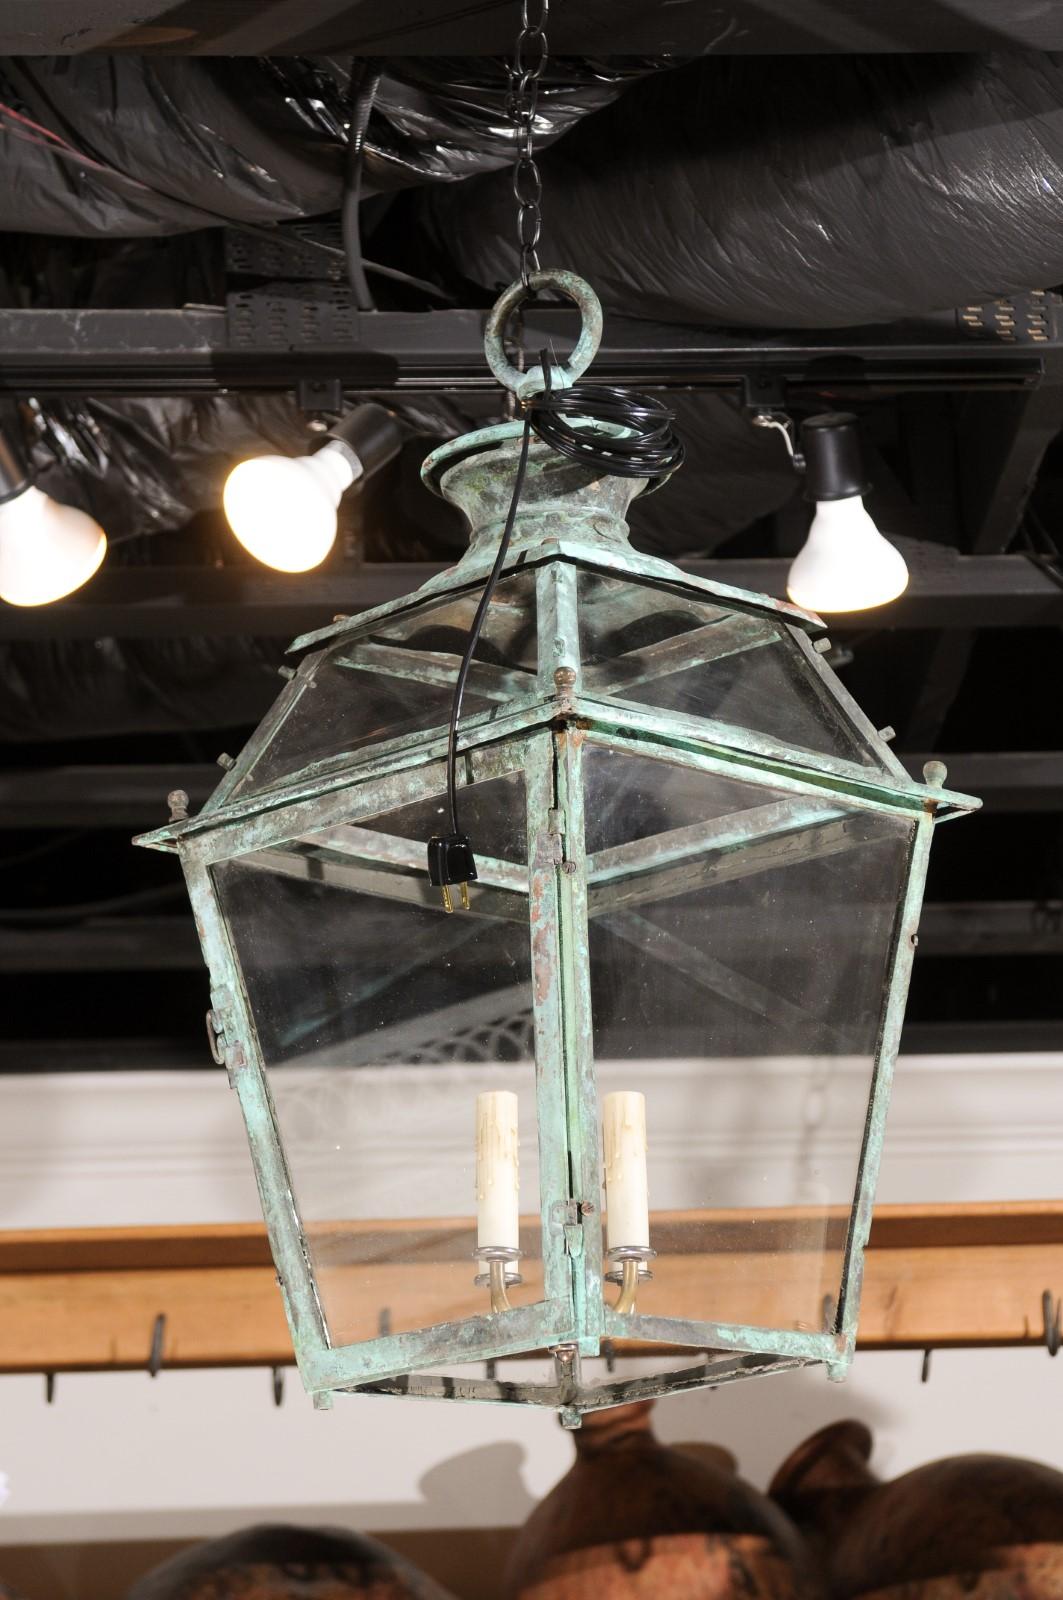 A French Napoléon III copper lantern from the late 19th century, with four lights and verdigris patina. Created in France during the last quarter of the 19th century, this copper lantern features a tapering silhouette boasting a nicely oxidized